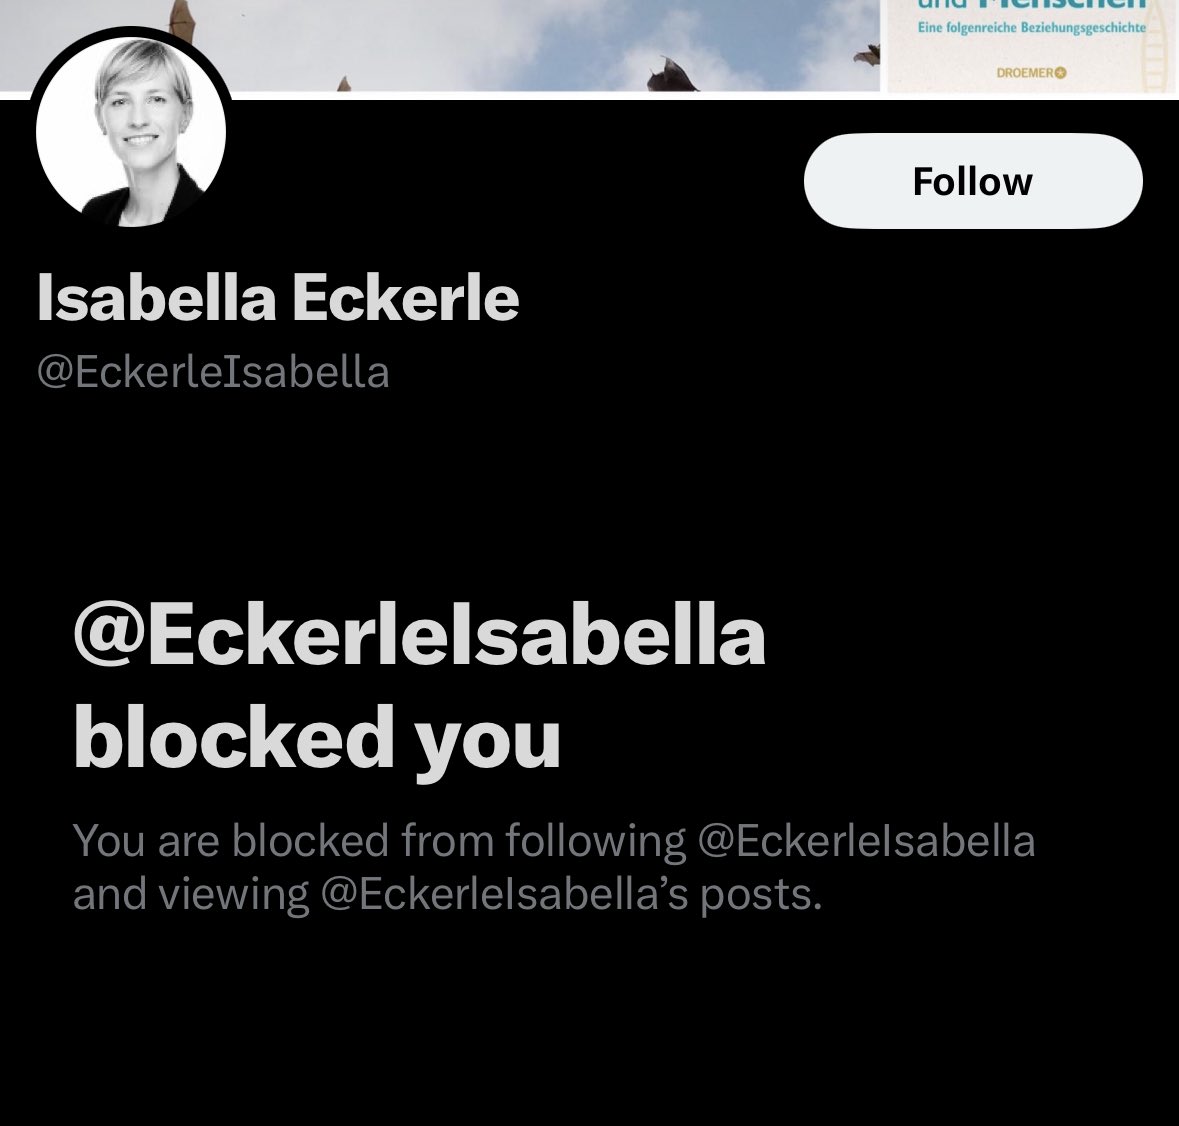 I have been blocked by Isabella Eckerle, another zoonosis partisan who pretends to pose reasonable questions about why people believe in silly lab origin conspiracy theories and then blocks anyone who tries to offer a reasonable response.